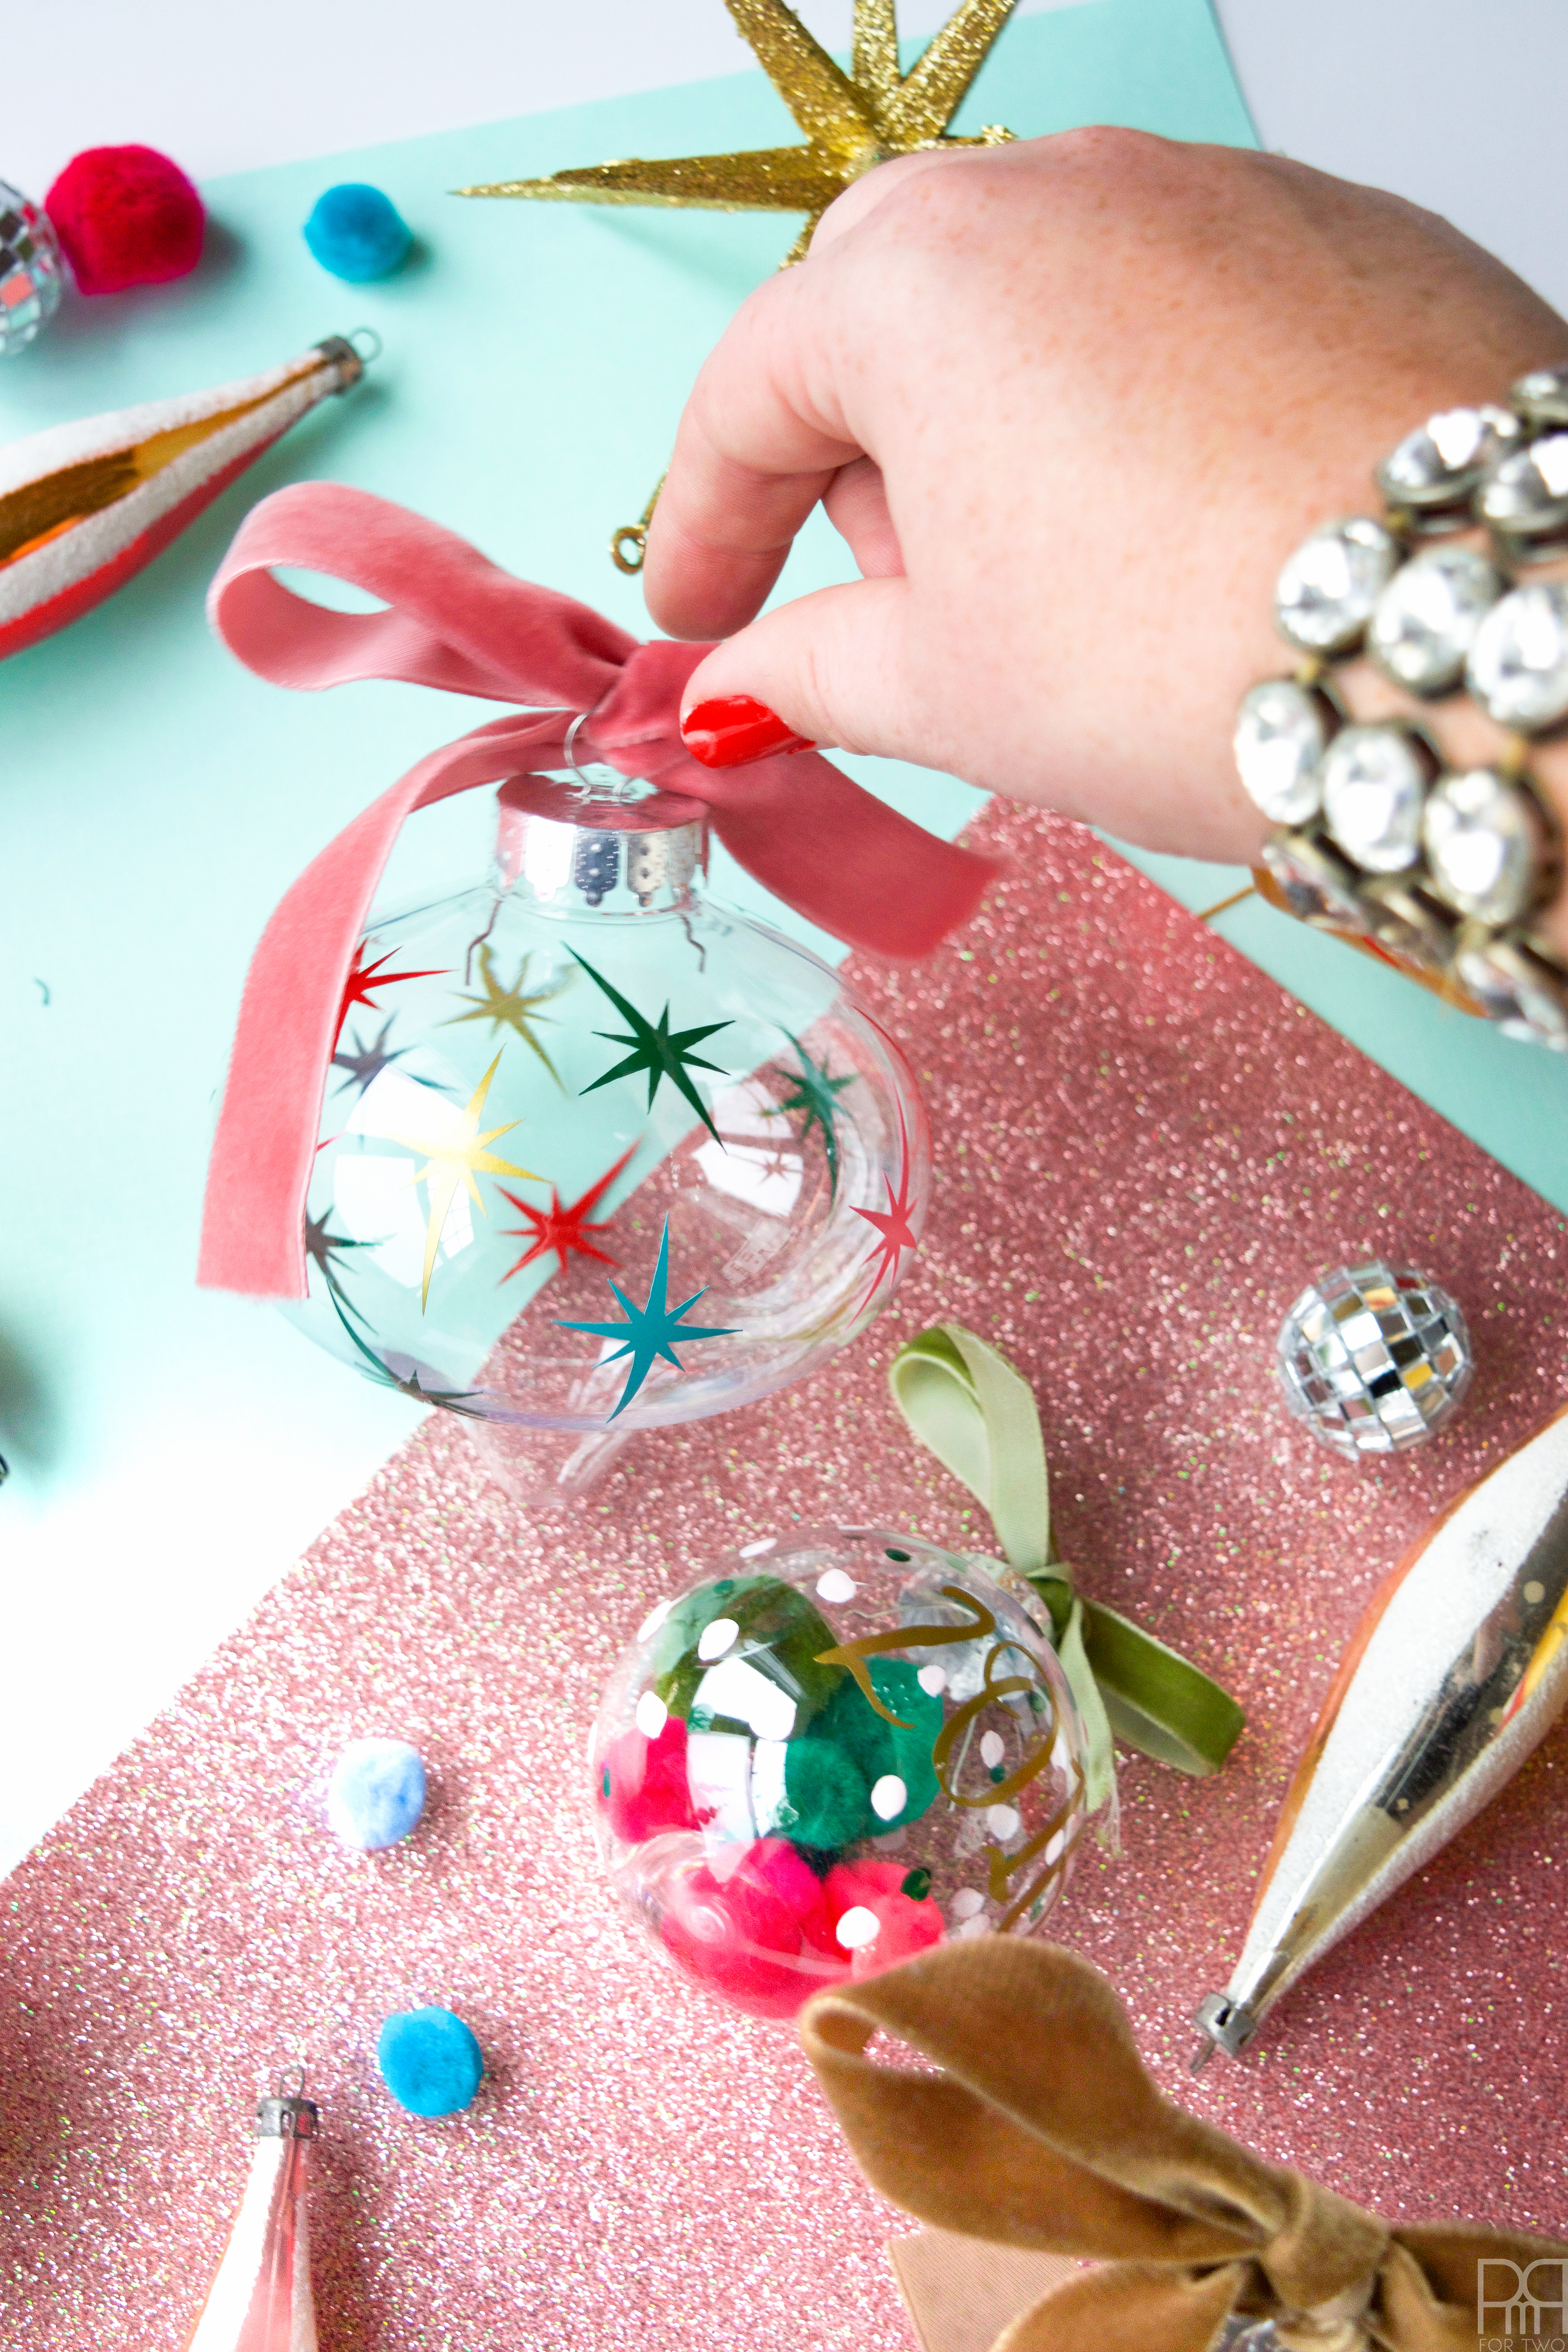 Create a vintage MCM style ornament using your Cricut and some vinyl #starburst #vintage #mcmornament